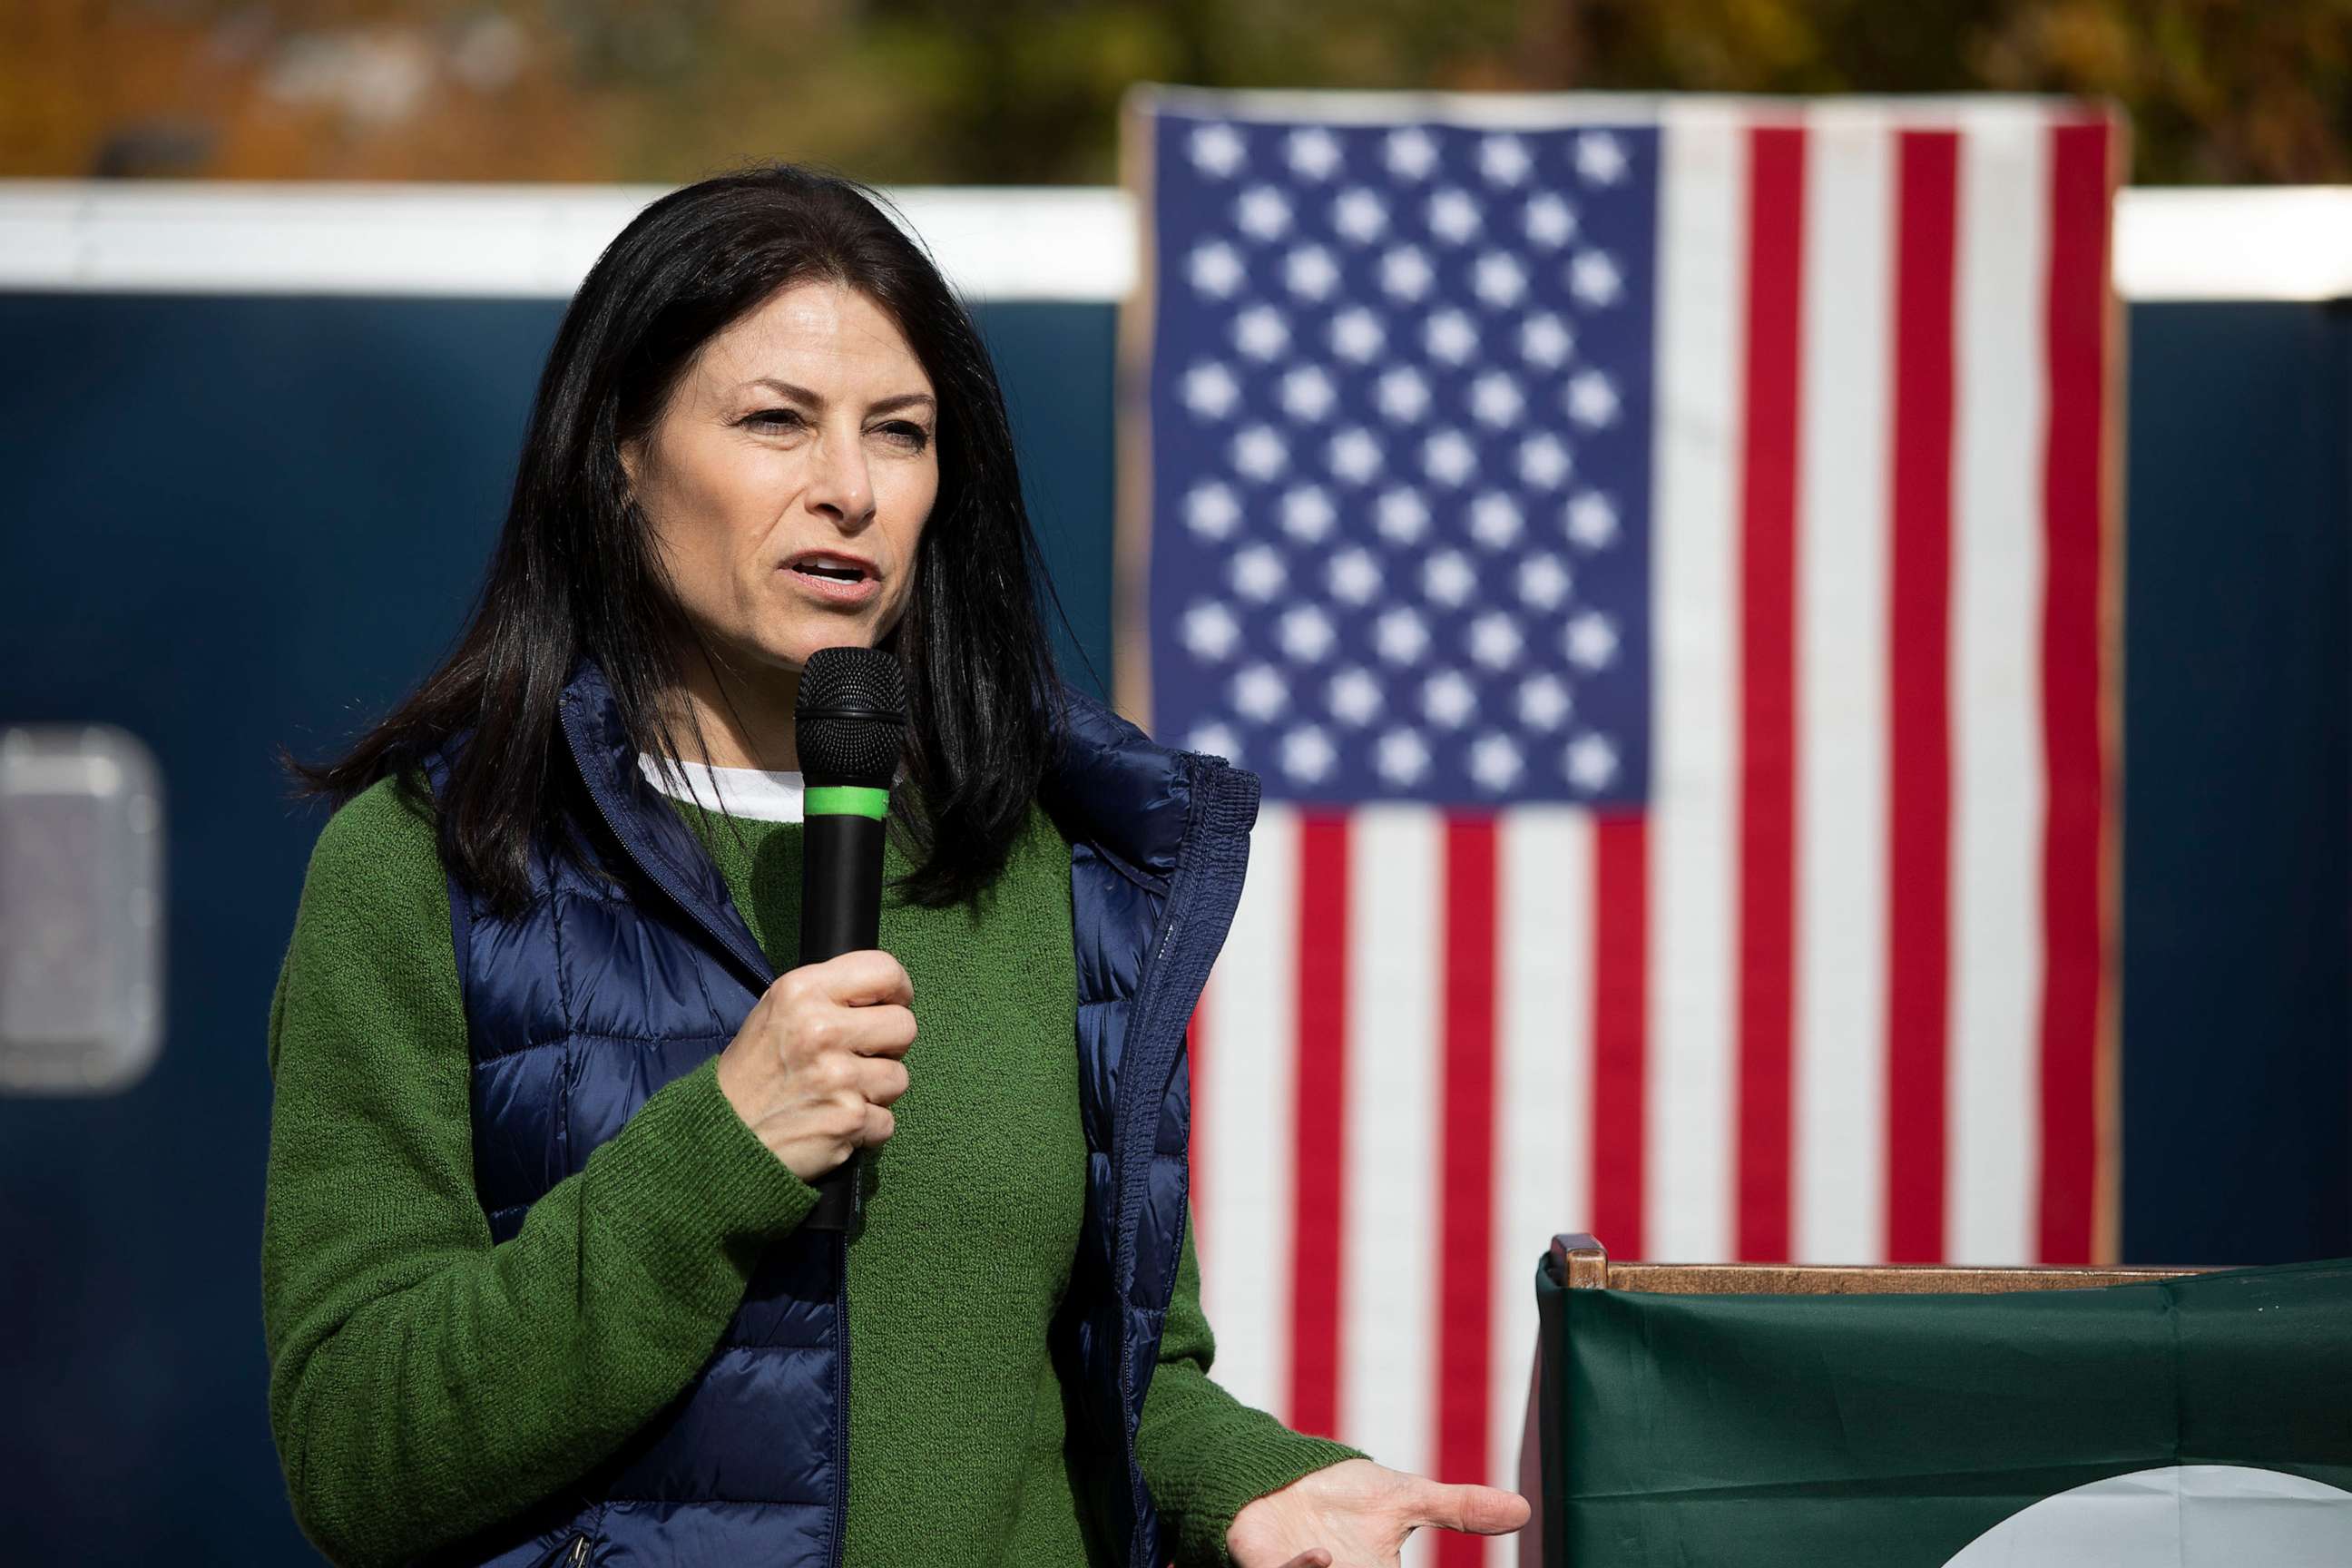 PHOTO: Michigan Attorney General Dana Nessel speaks at a campaign rally held by U.S. Rep. Elissa Slotkin designed to get Michigan State University students, faculty and staff out to the polls, Oct. 16, 2022, in East Lansing, Mich.